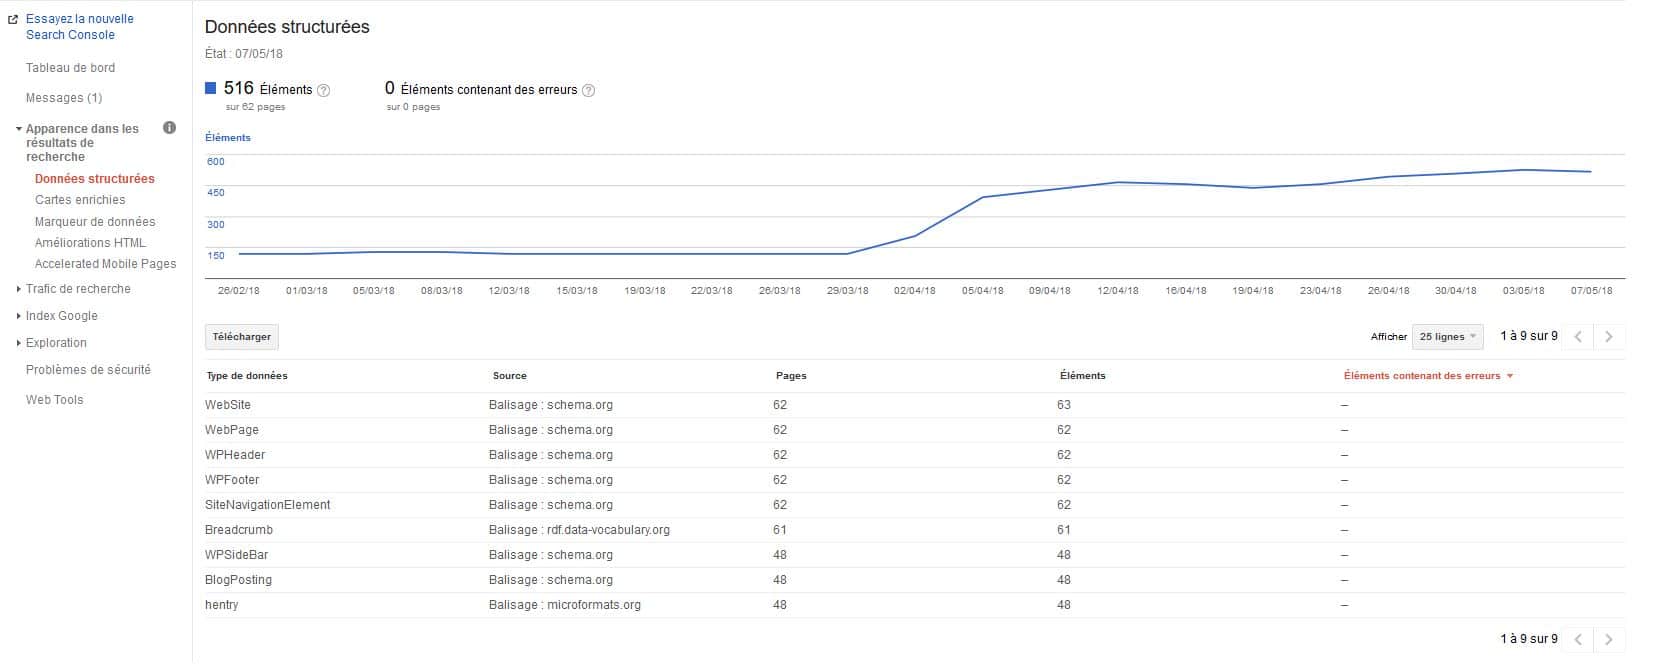 donnees structurees search console